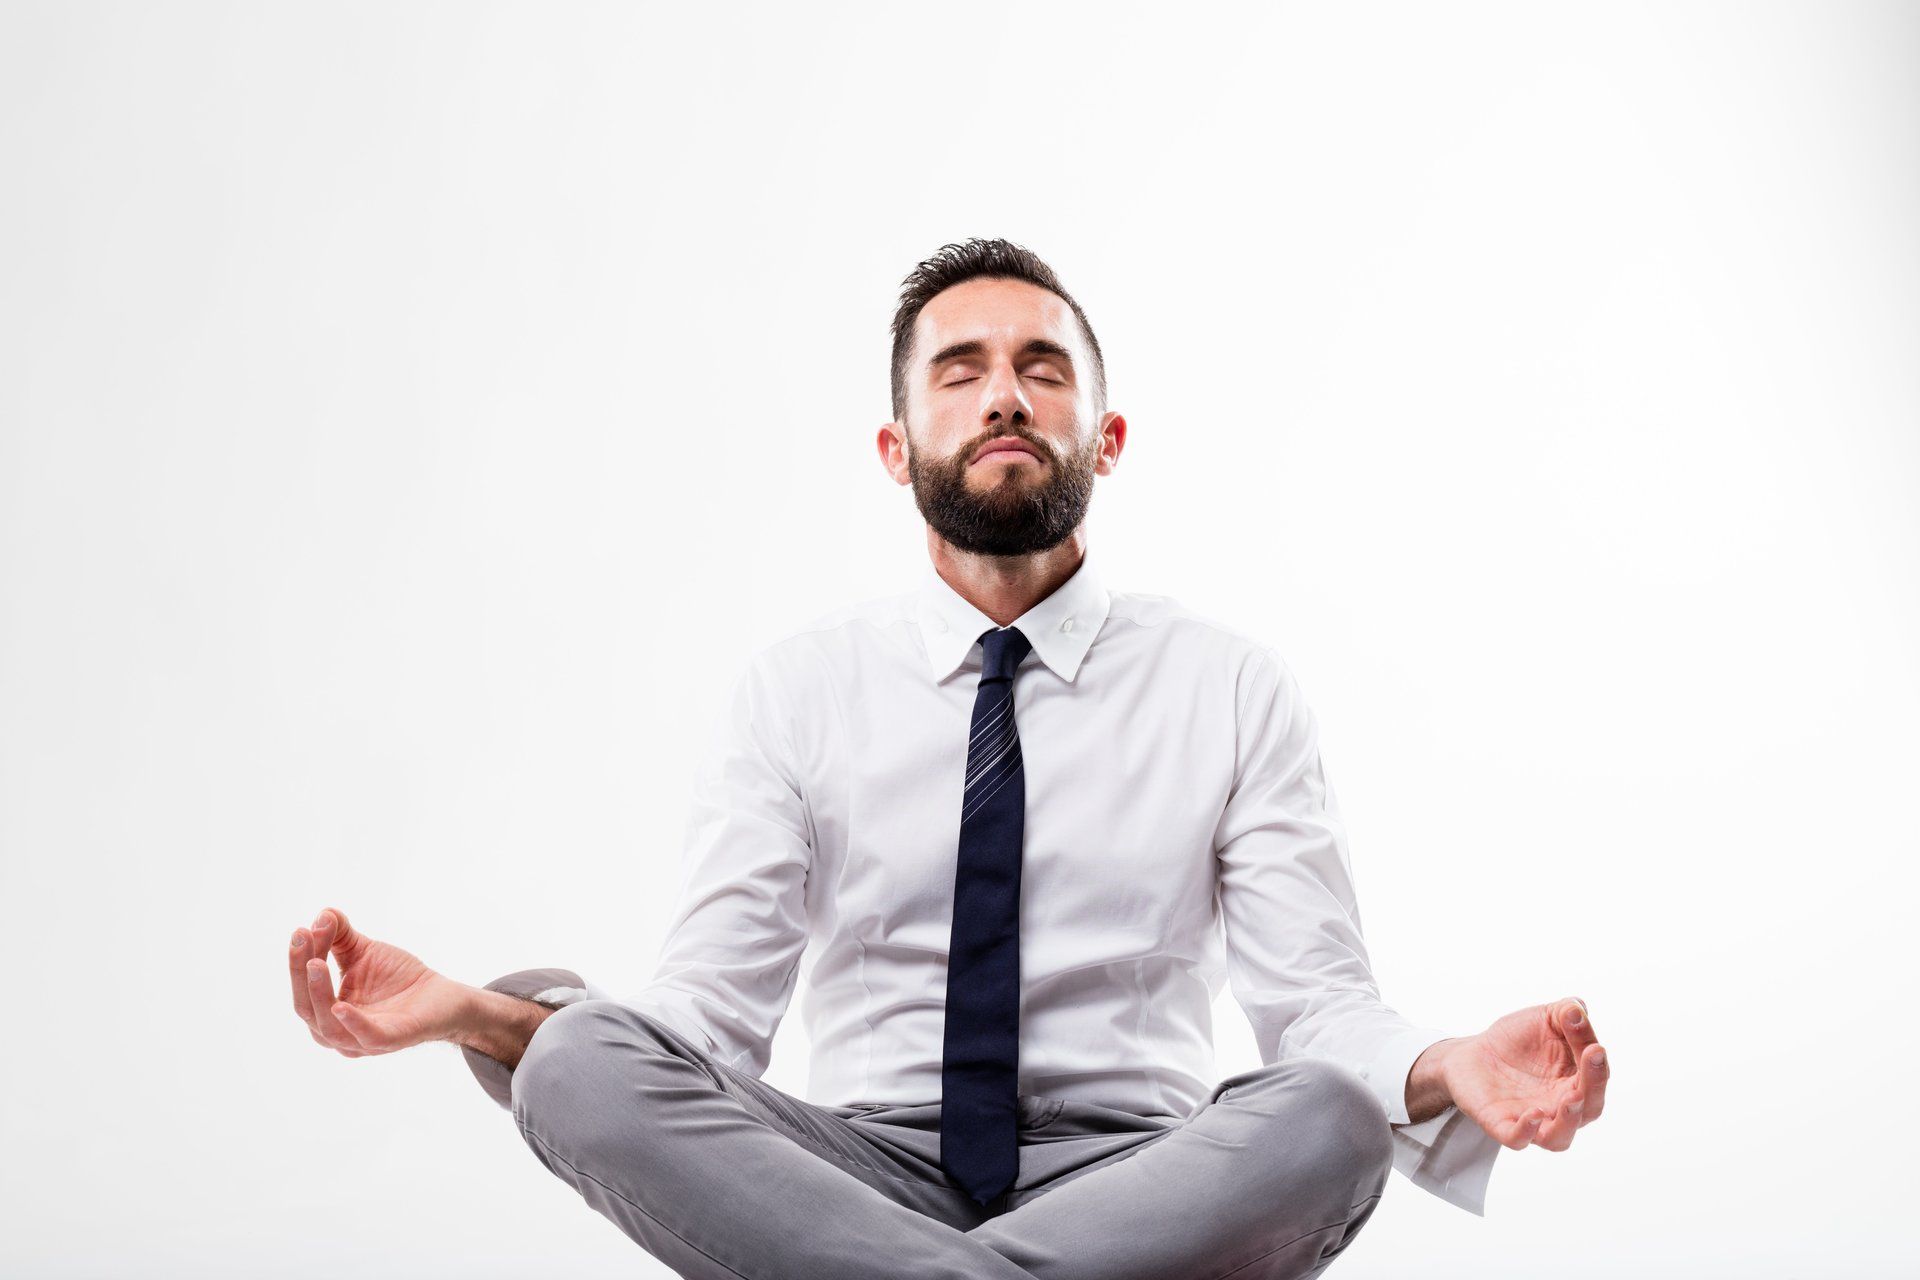 Man in a suit meditating with his eyes closed.